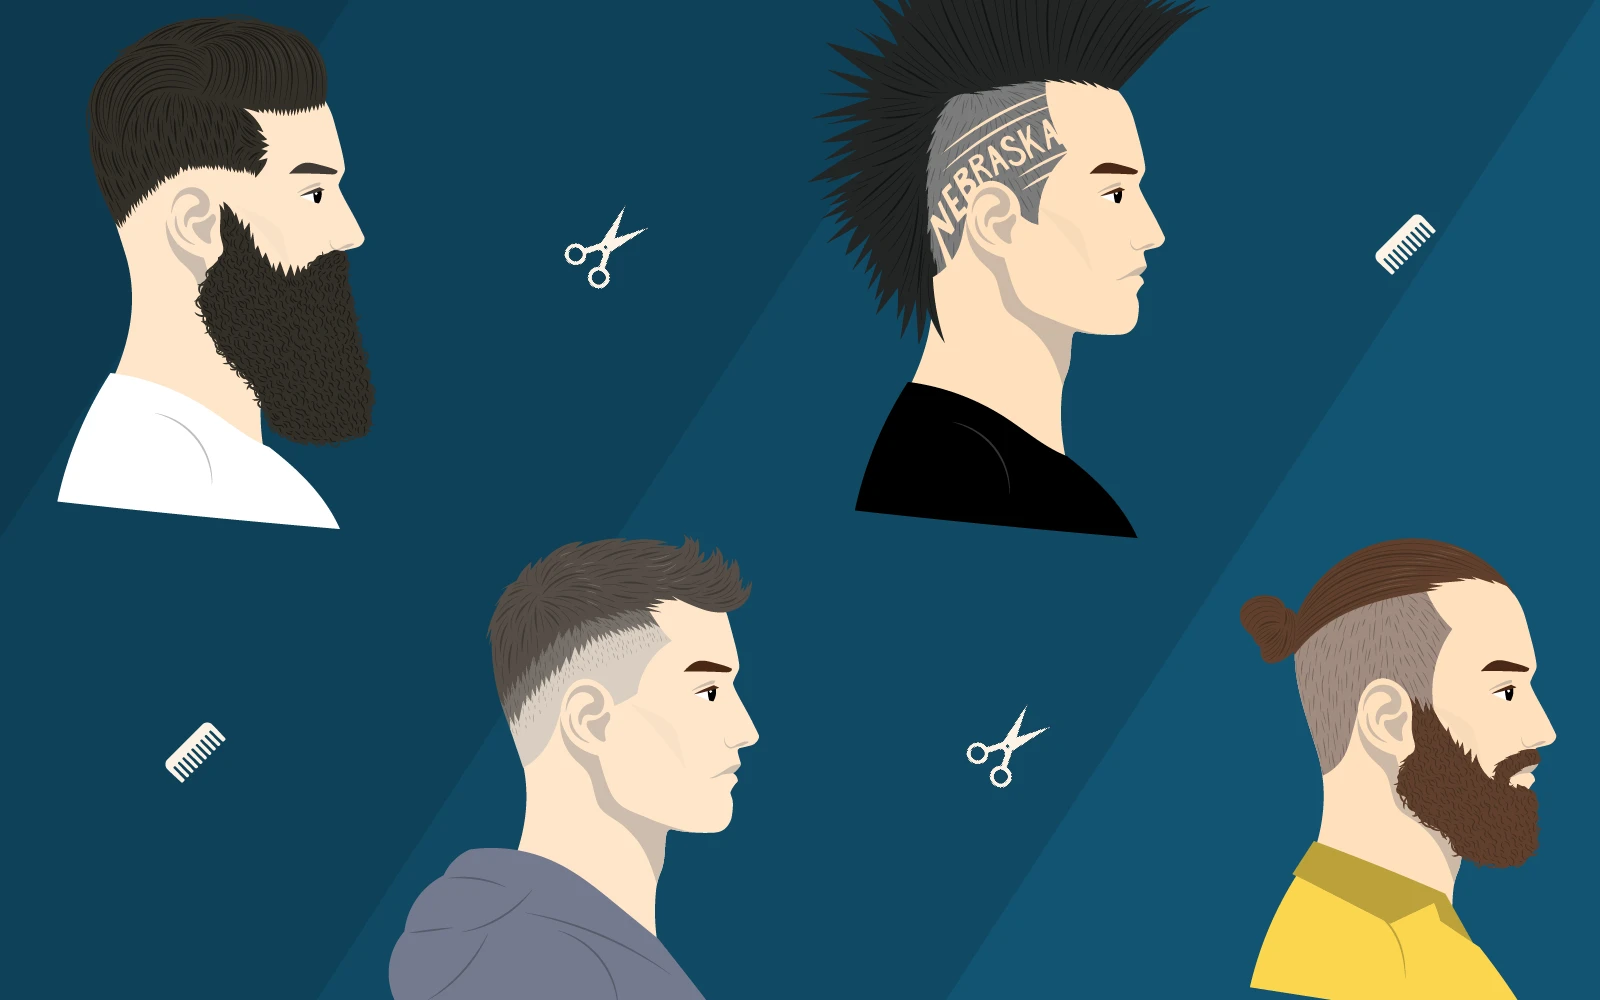 Short Sides, Long Top Haircuts | 30 of Our Favorite Cuts